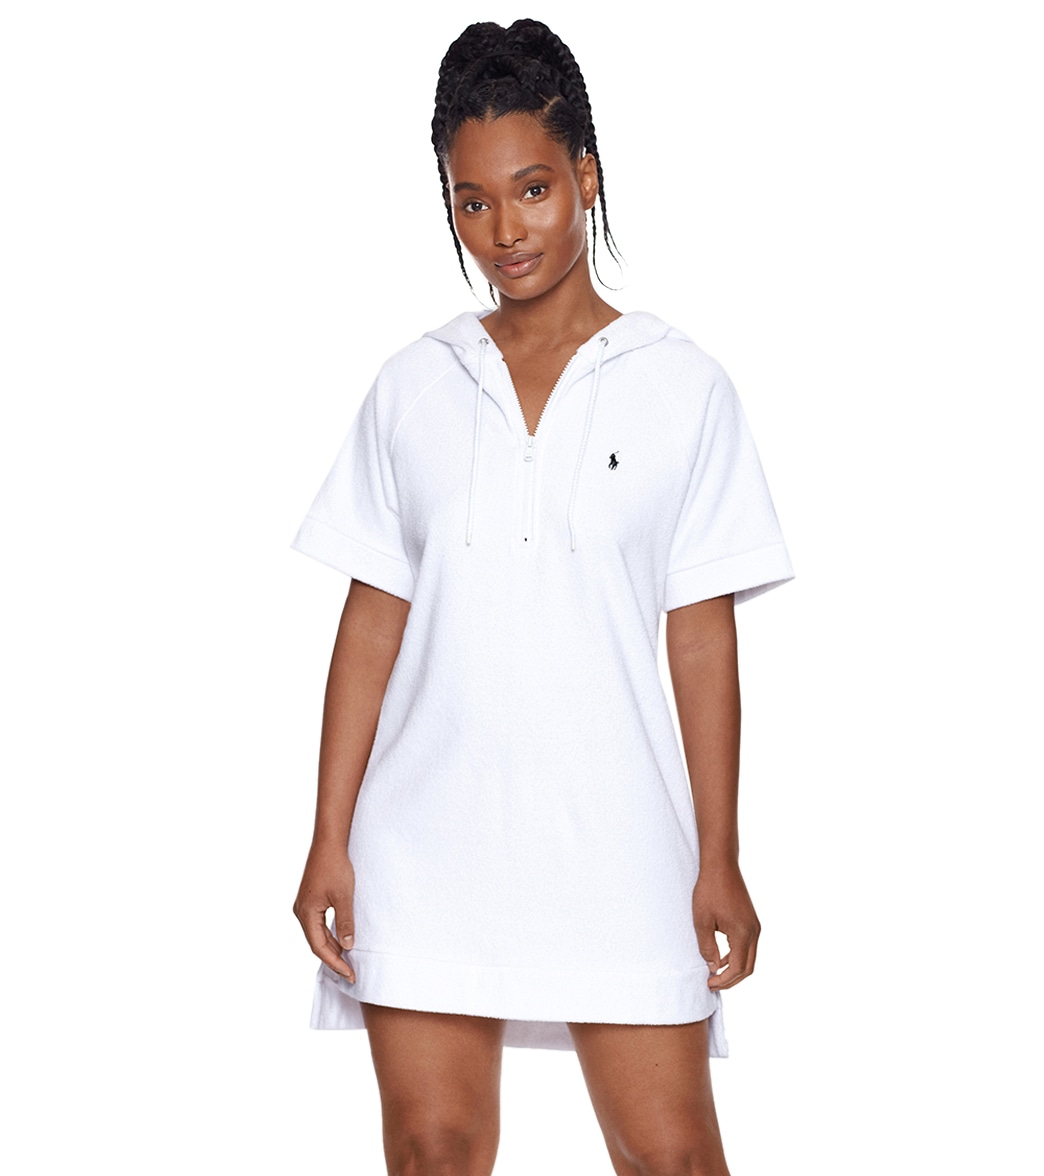 Ralph Lauren Polo Women's Terry Hooded Dress - White Large Cotton/Polyester - Swimoutlet.com